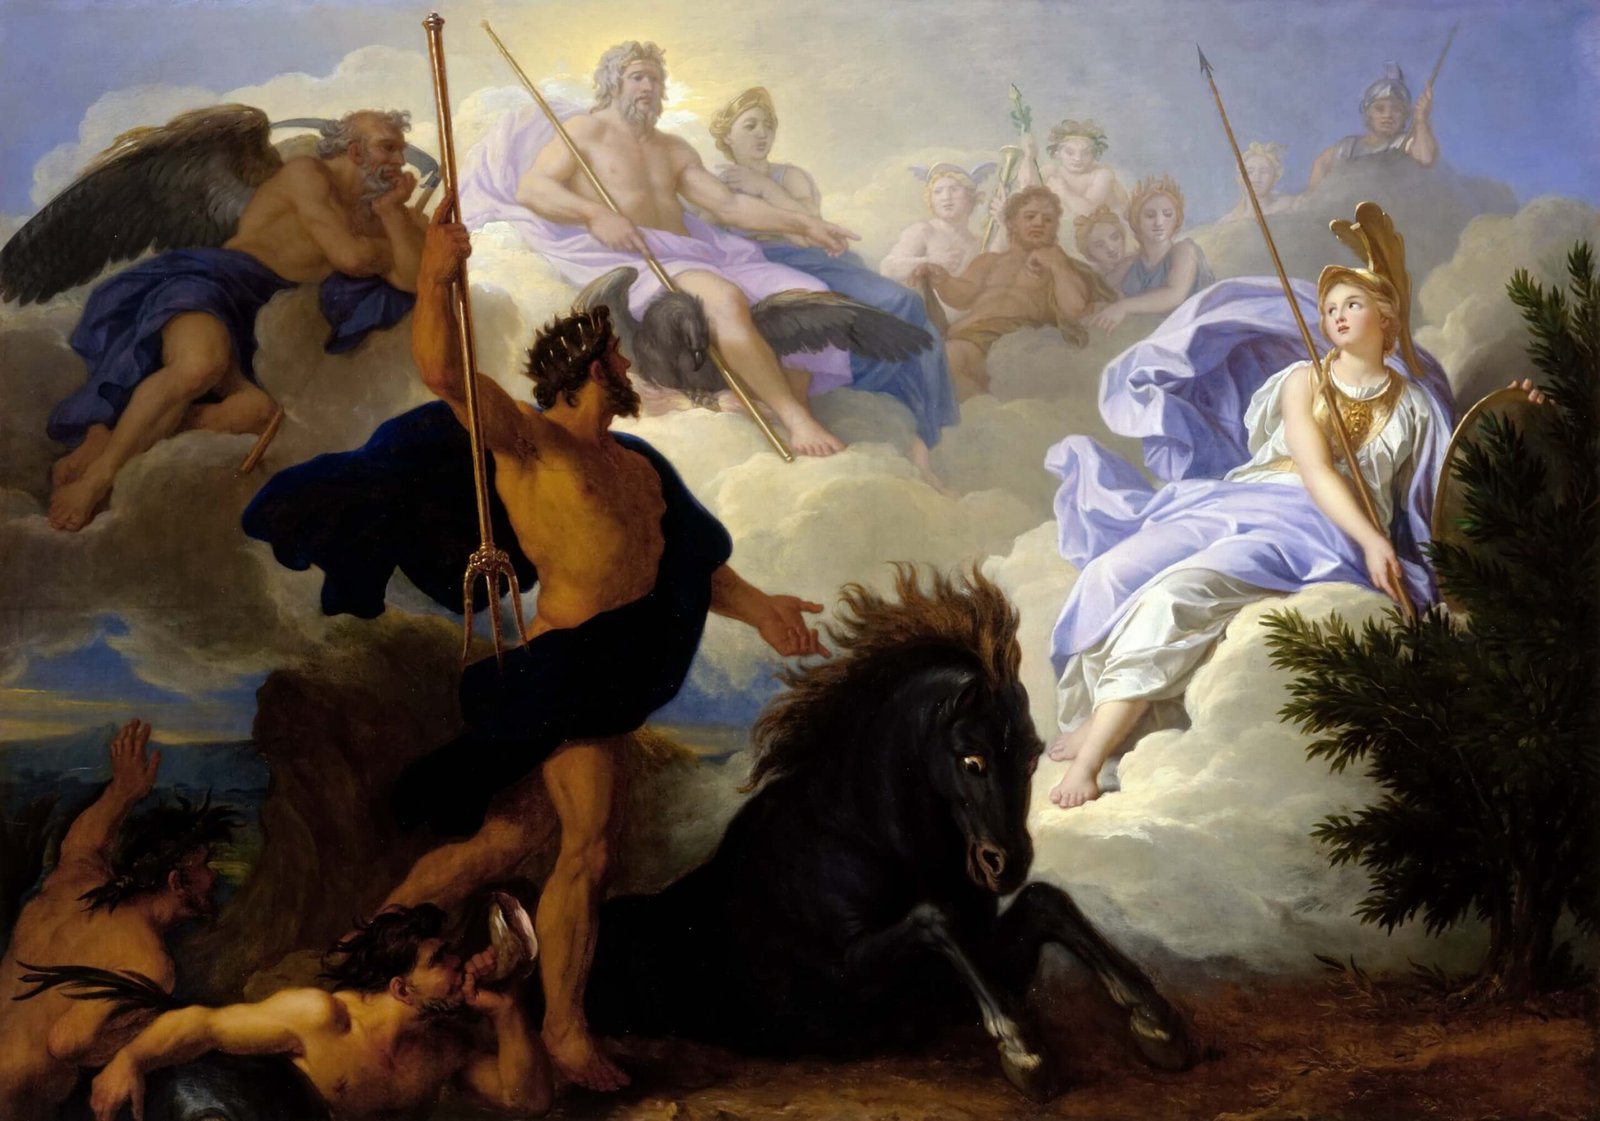 This painting represents Poseidon and Athena, surrounded by the other gods, sitting on the clouds and having a dispute.